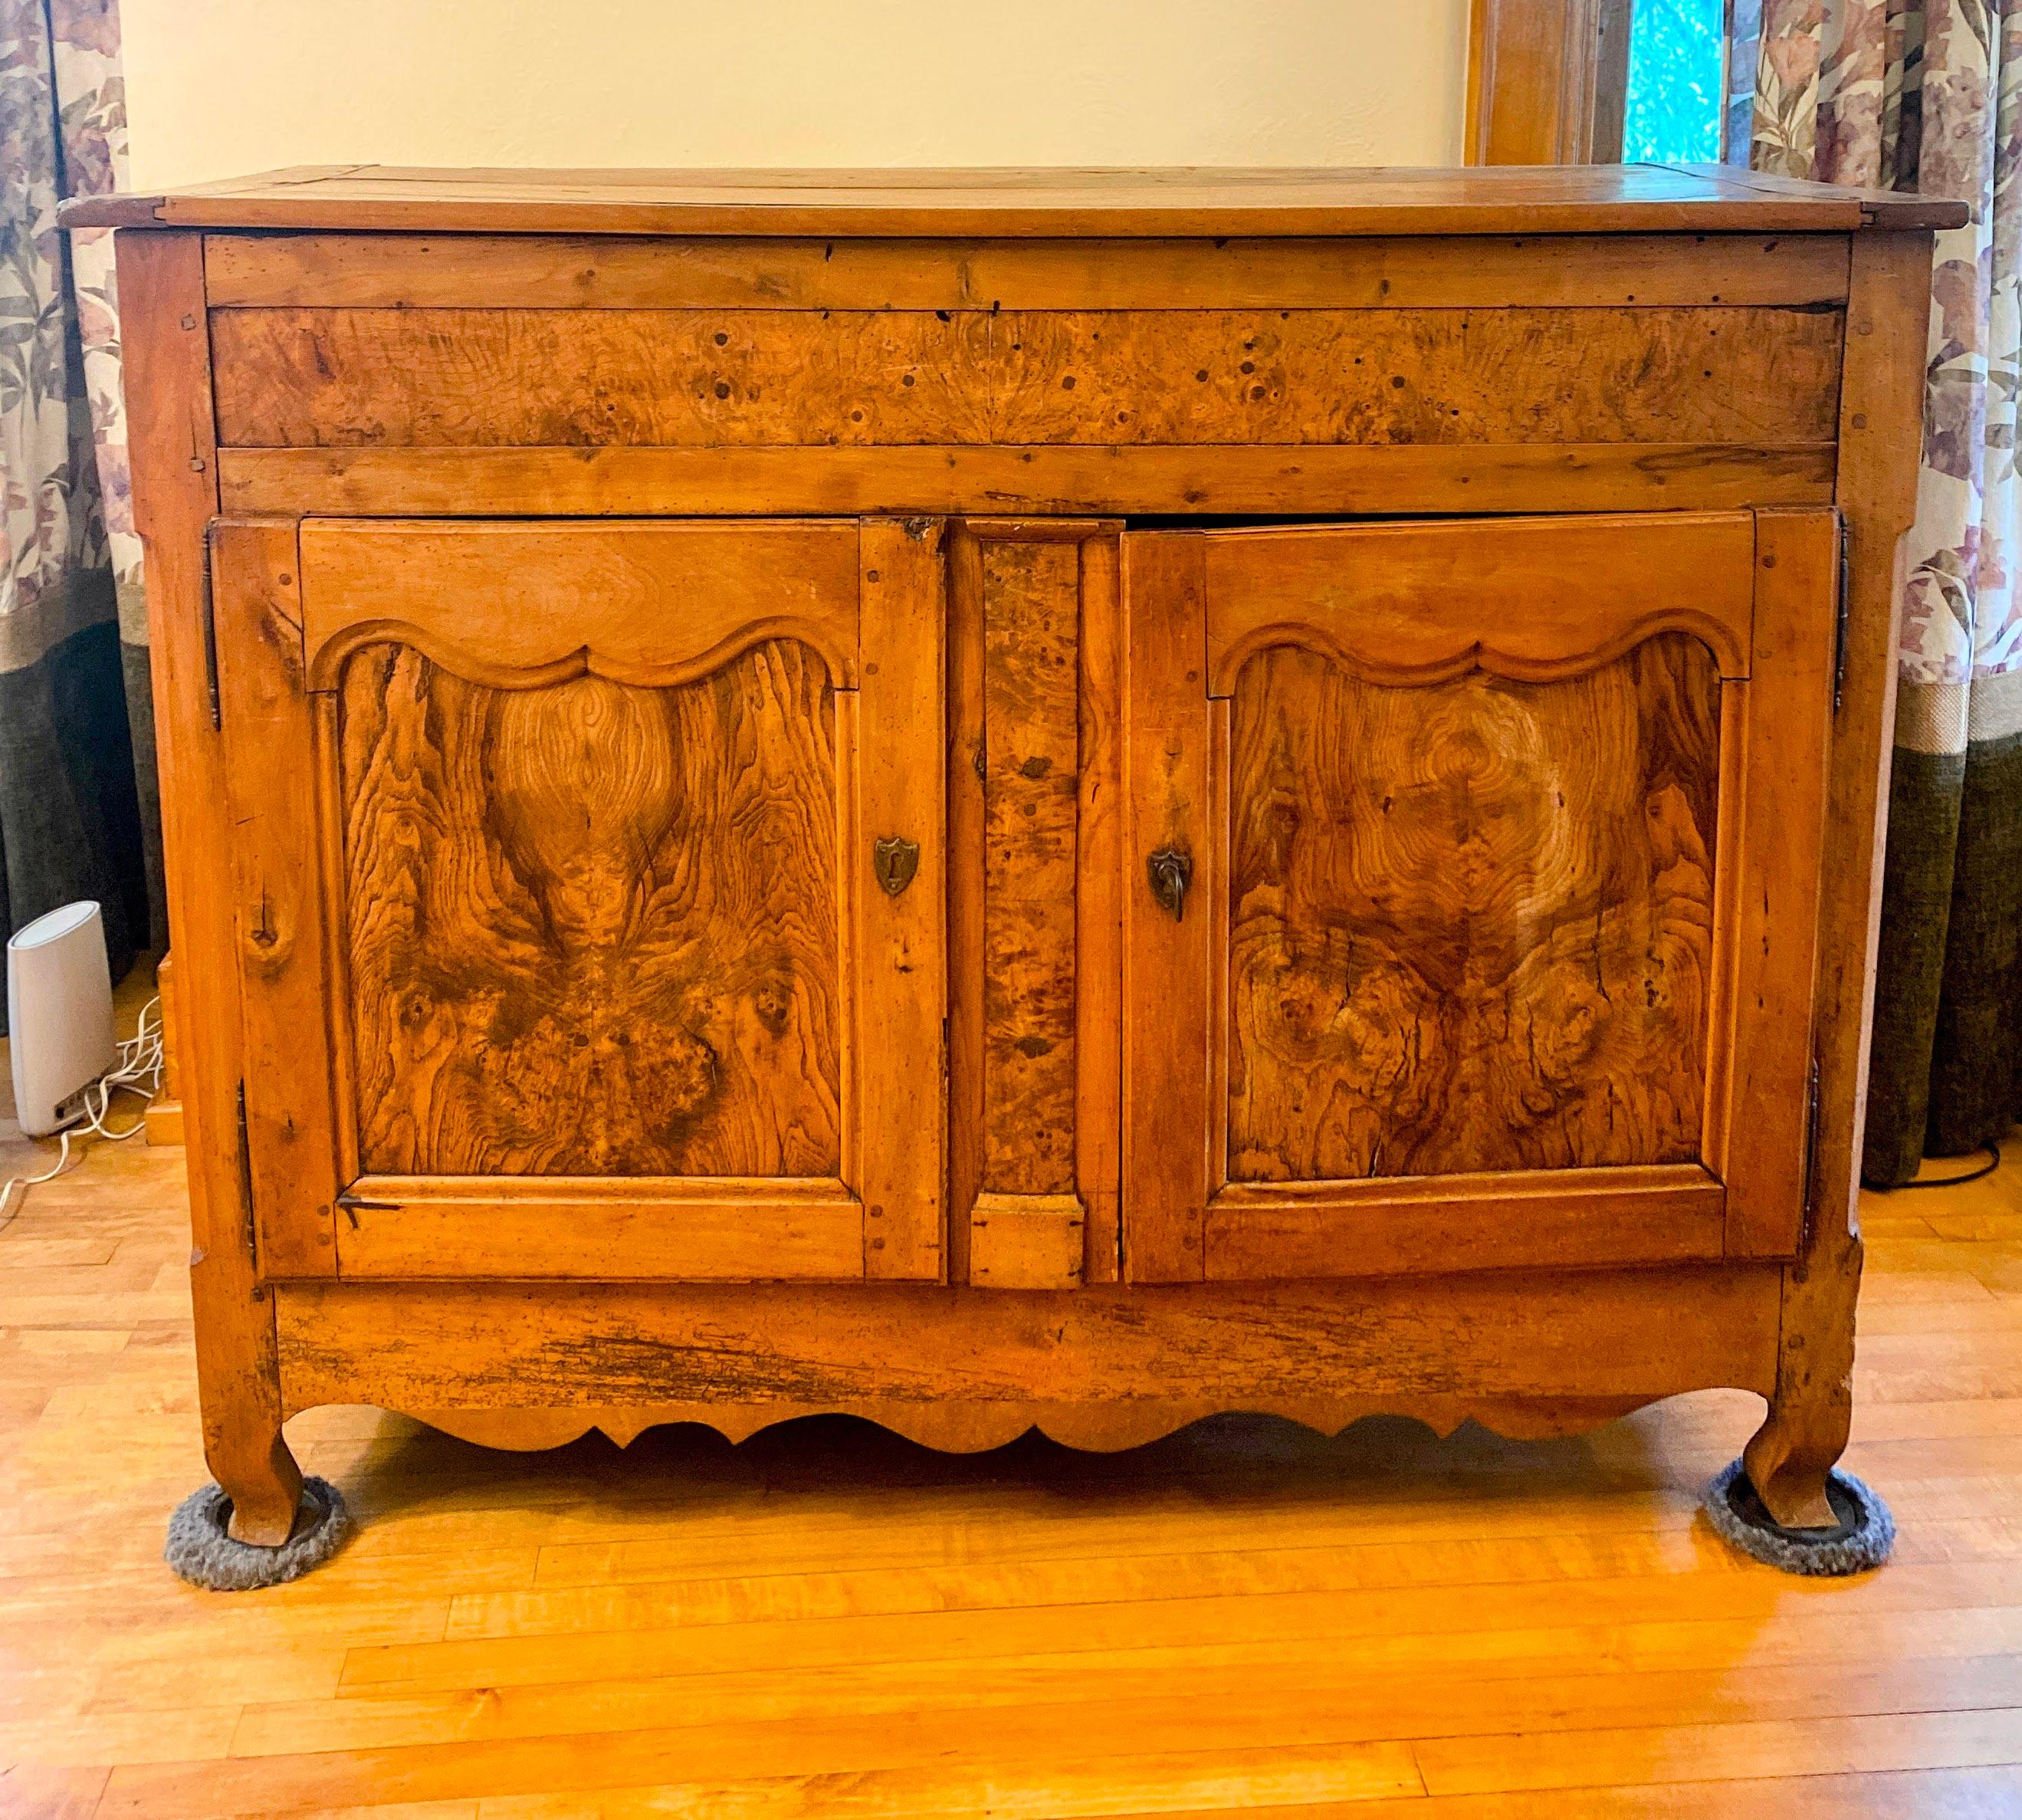 Antique French Tall Blanket Chest Buffet. Buffet is made of fruitwood (pear and apple wood), C. 1800s,  The top opens to reveal the storage trunk compartment. Also features 2 doors in front. One door has a fixed lock. Wooden peg construction (see